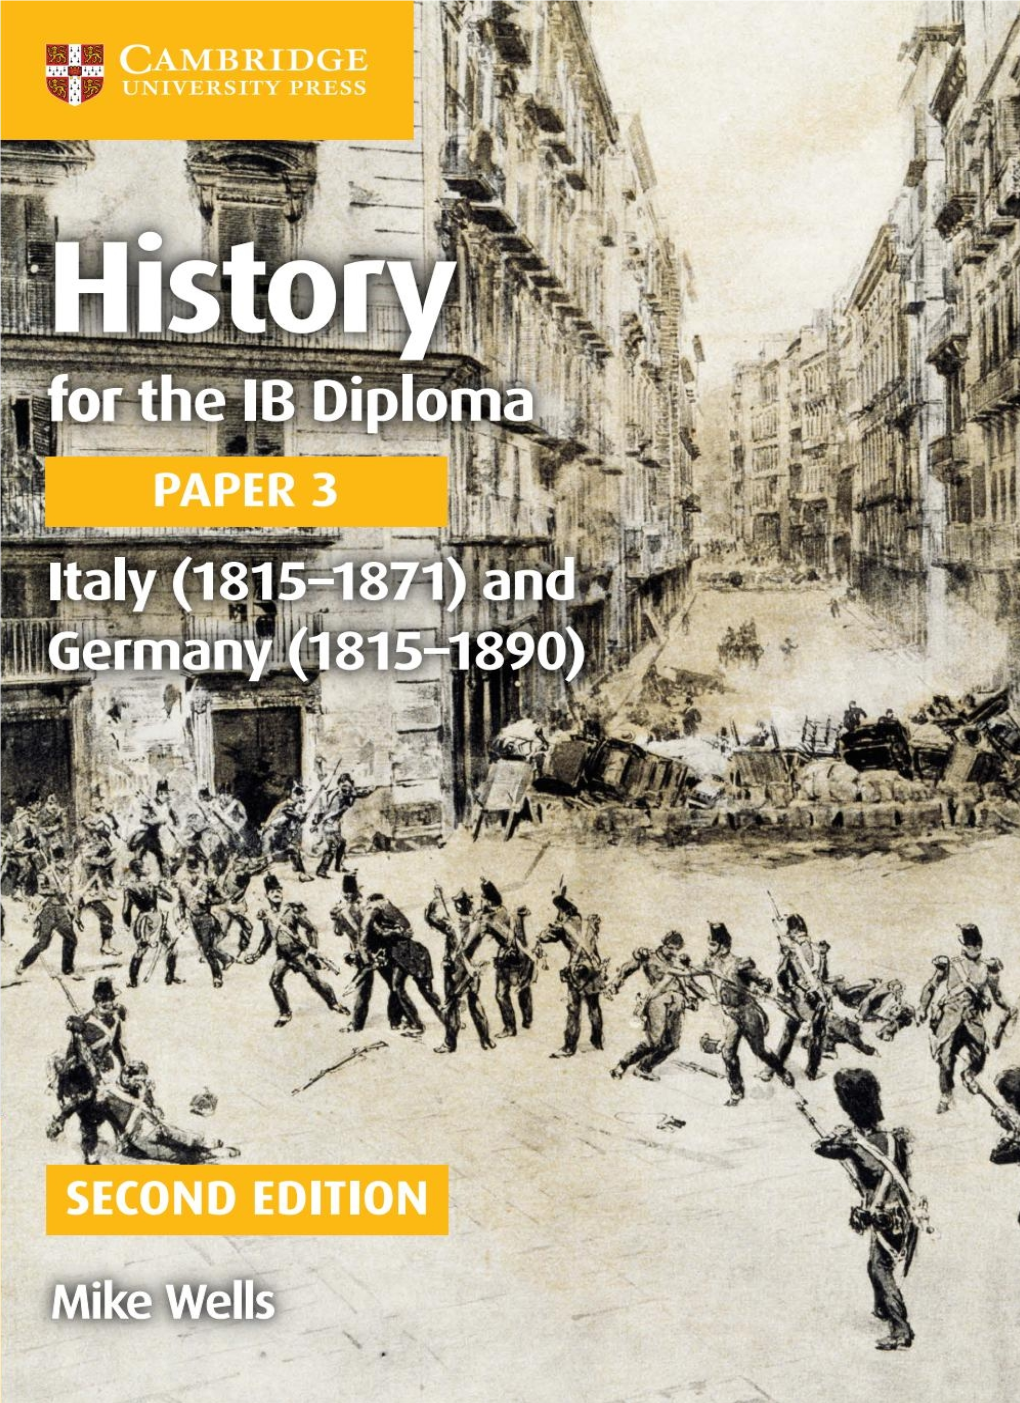 PAPER 3 Italy (1815–1871) and Germany (1815–1890) SECOND EDITION